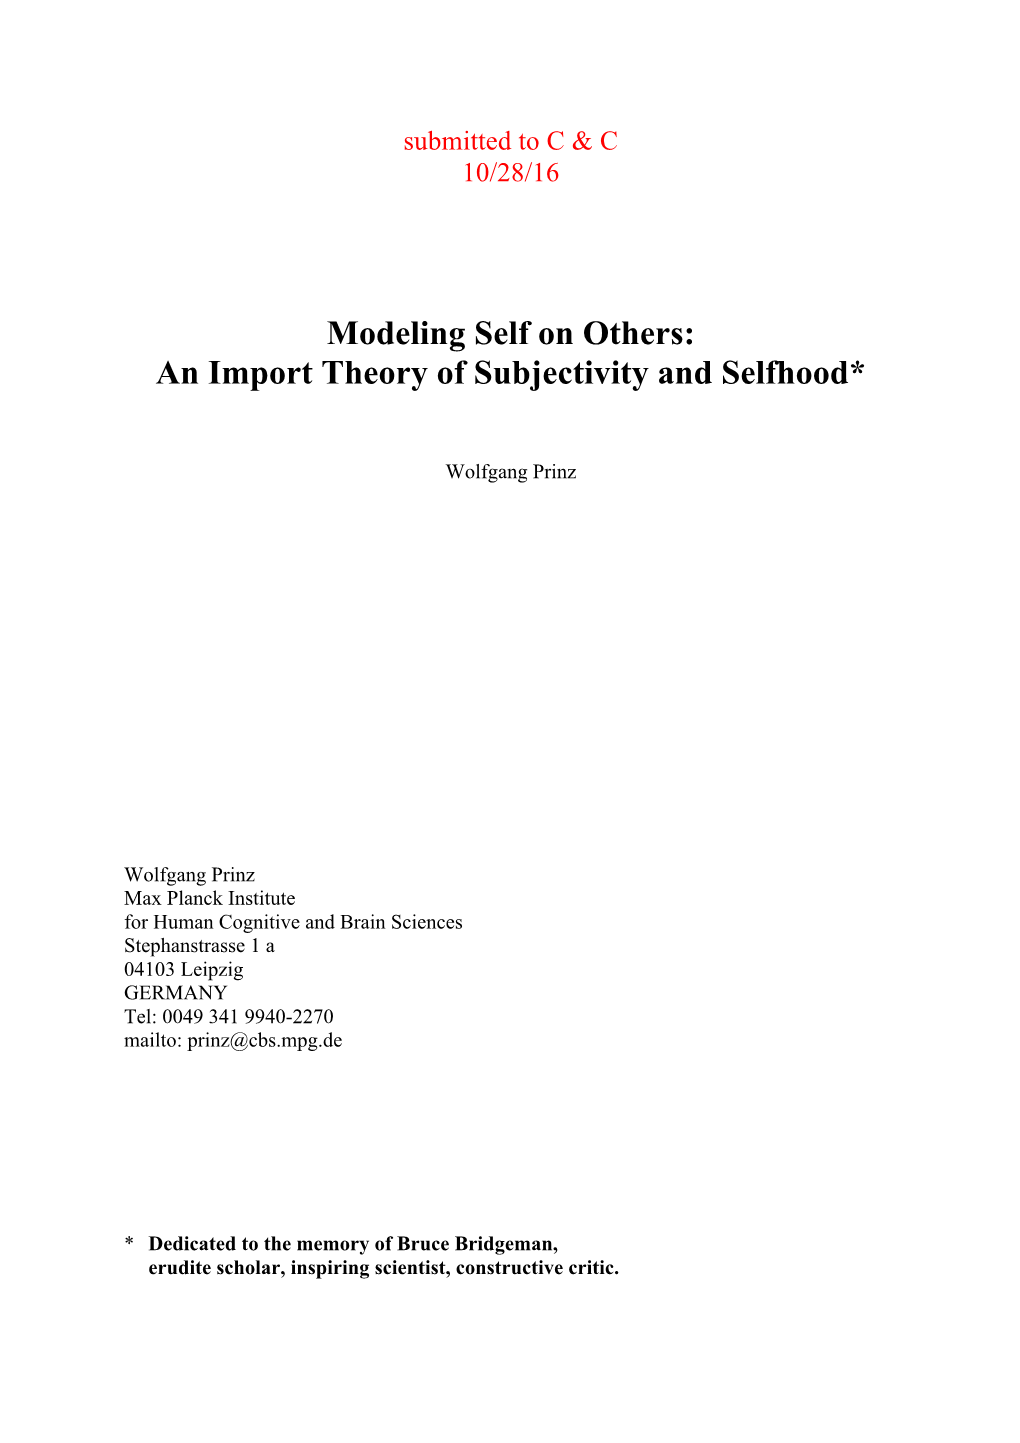 Modeling Self on Others: an Import Theory of Subjectivity and Selfhood*